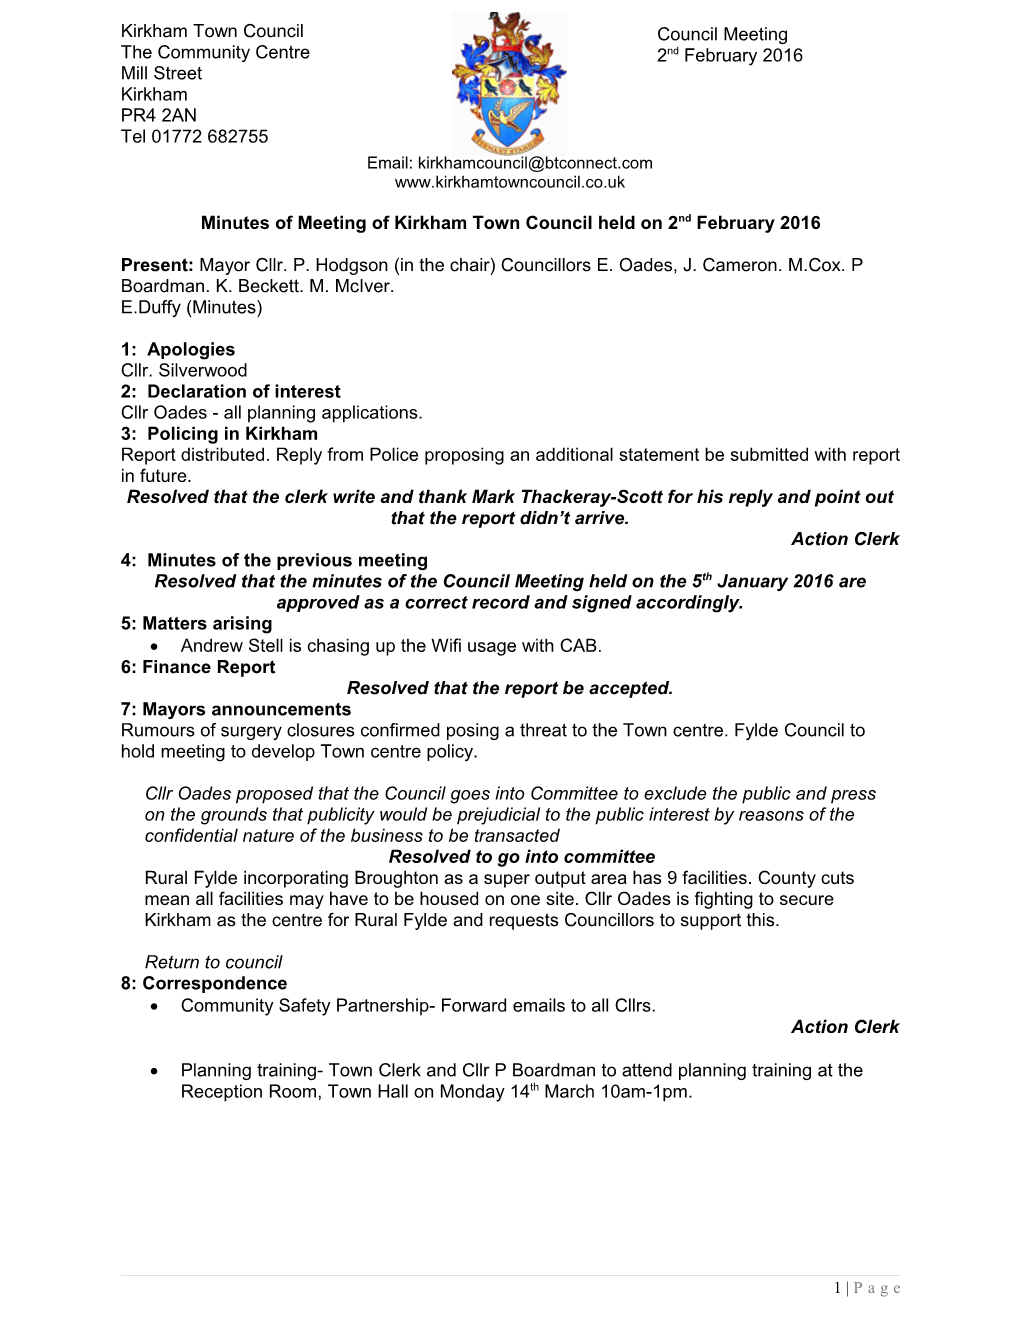 Minutes of Meeting of Kirkham Town Council Held on 2Nd February 2016